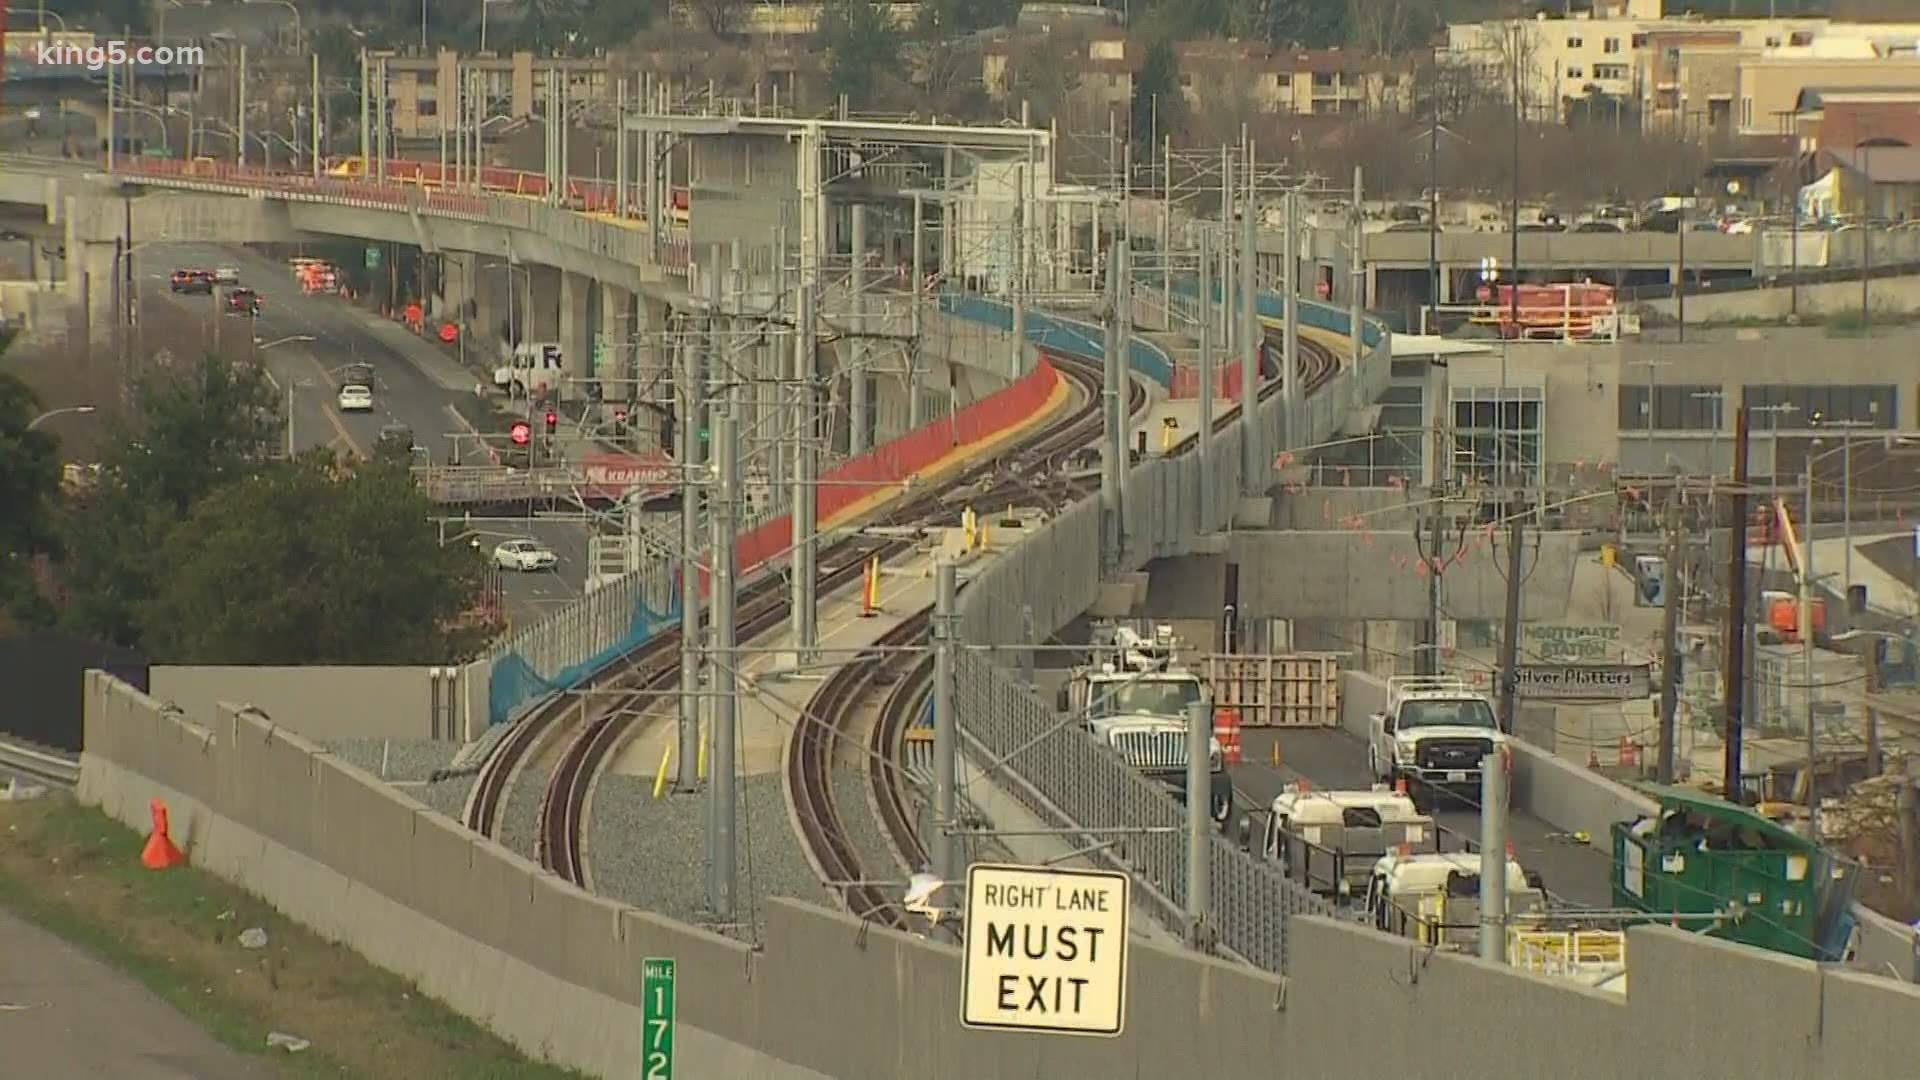 Sound Transit started testing trains for the first time Monday on the new elevated light rail tracks in Northgate. The testing will continue for several months.